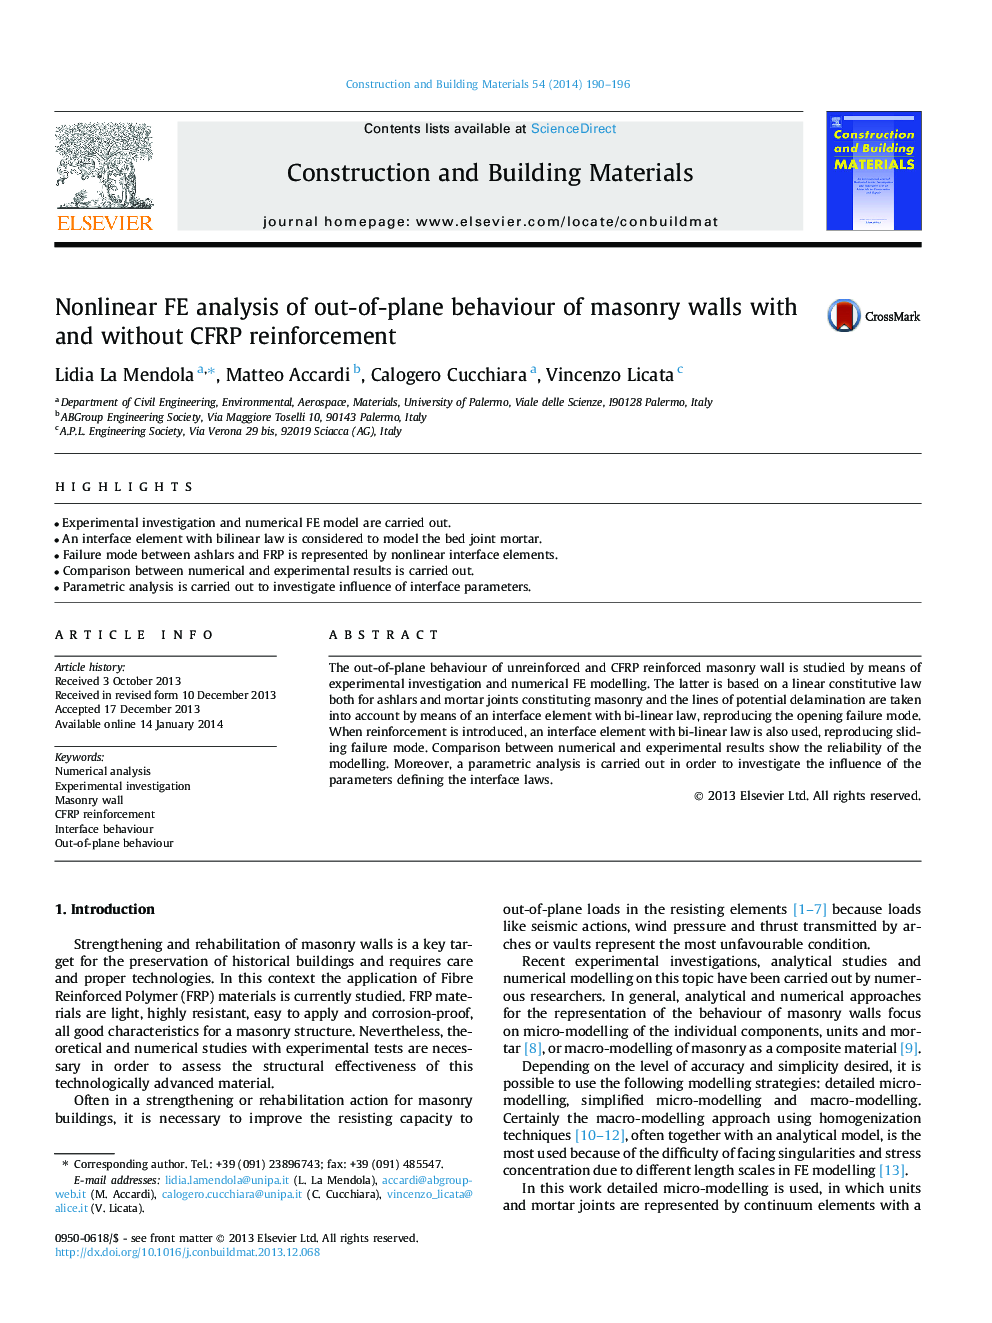 Nonlinear FE analysis of out-of-plane behaviour of masonry walls with and without CFRP reinforcement